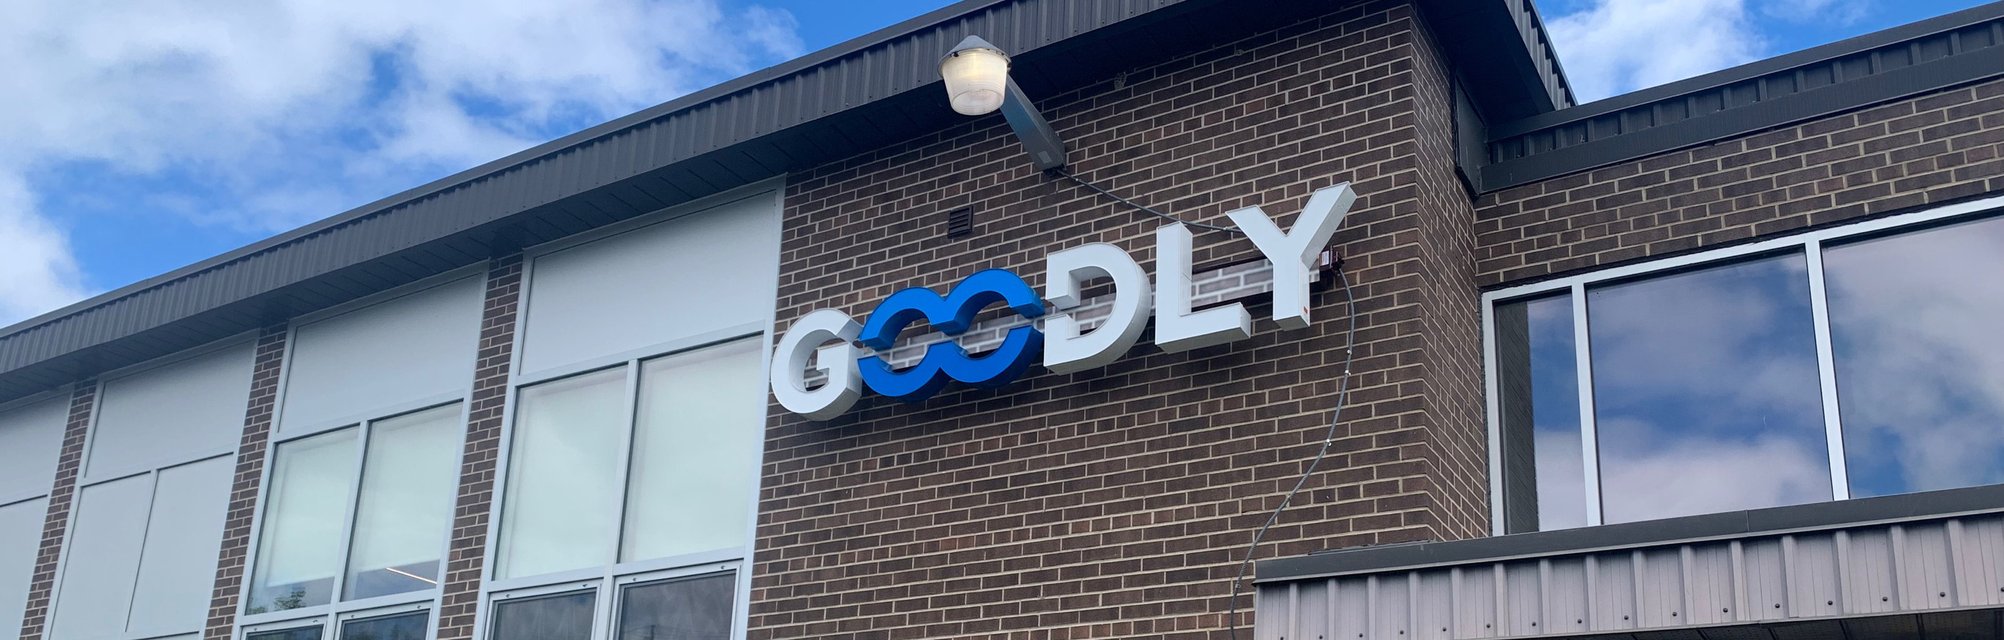 Featured Image: Hardware Lifecycle Management - Goodly Cloud Headquarters - Read full post: Goodly Cloud joins L-SPARK BootCamp after being shortlisted for SaaS Accelerator